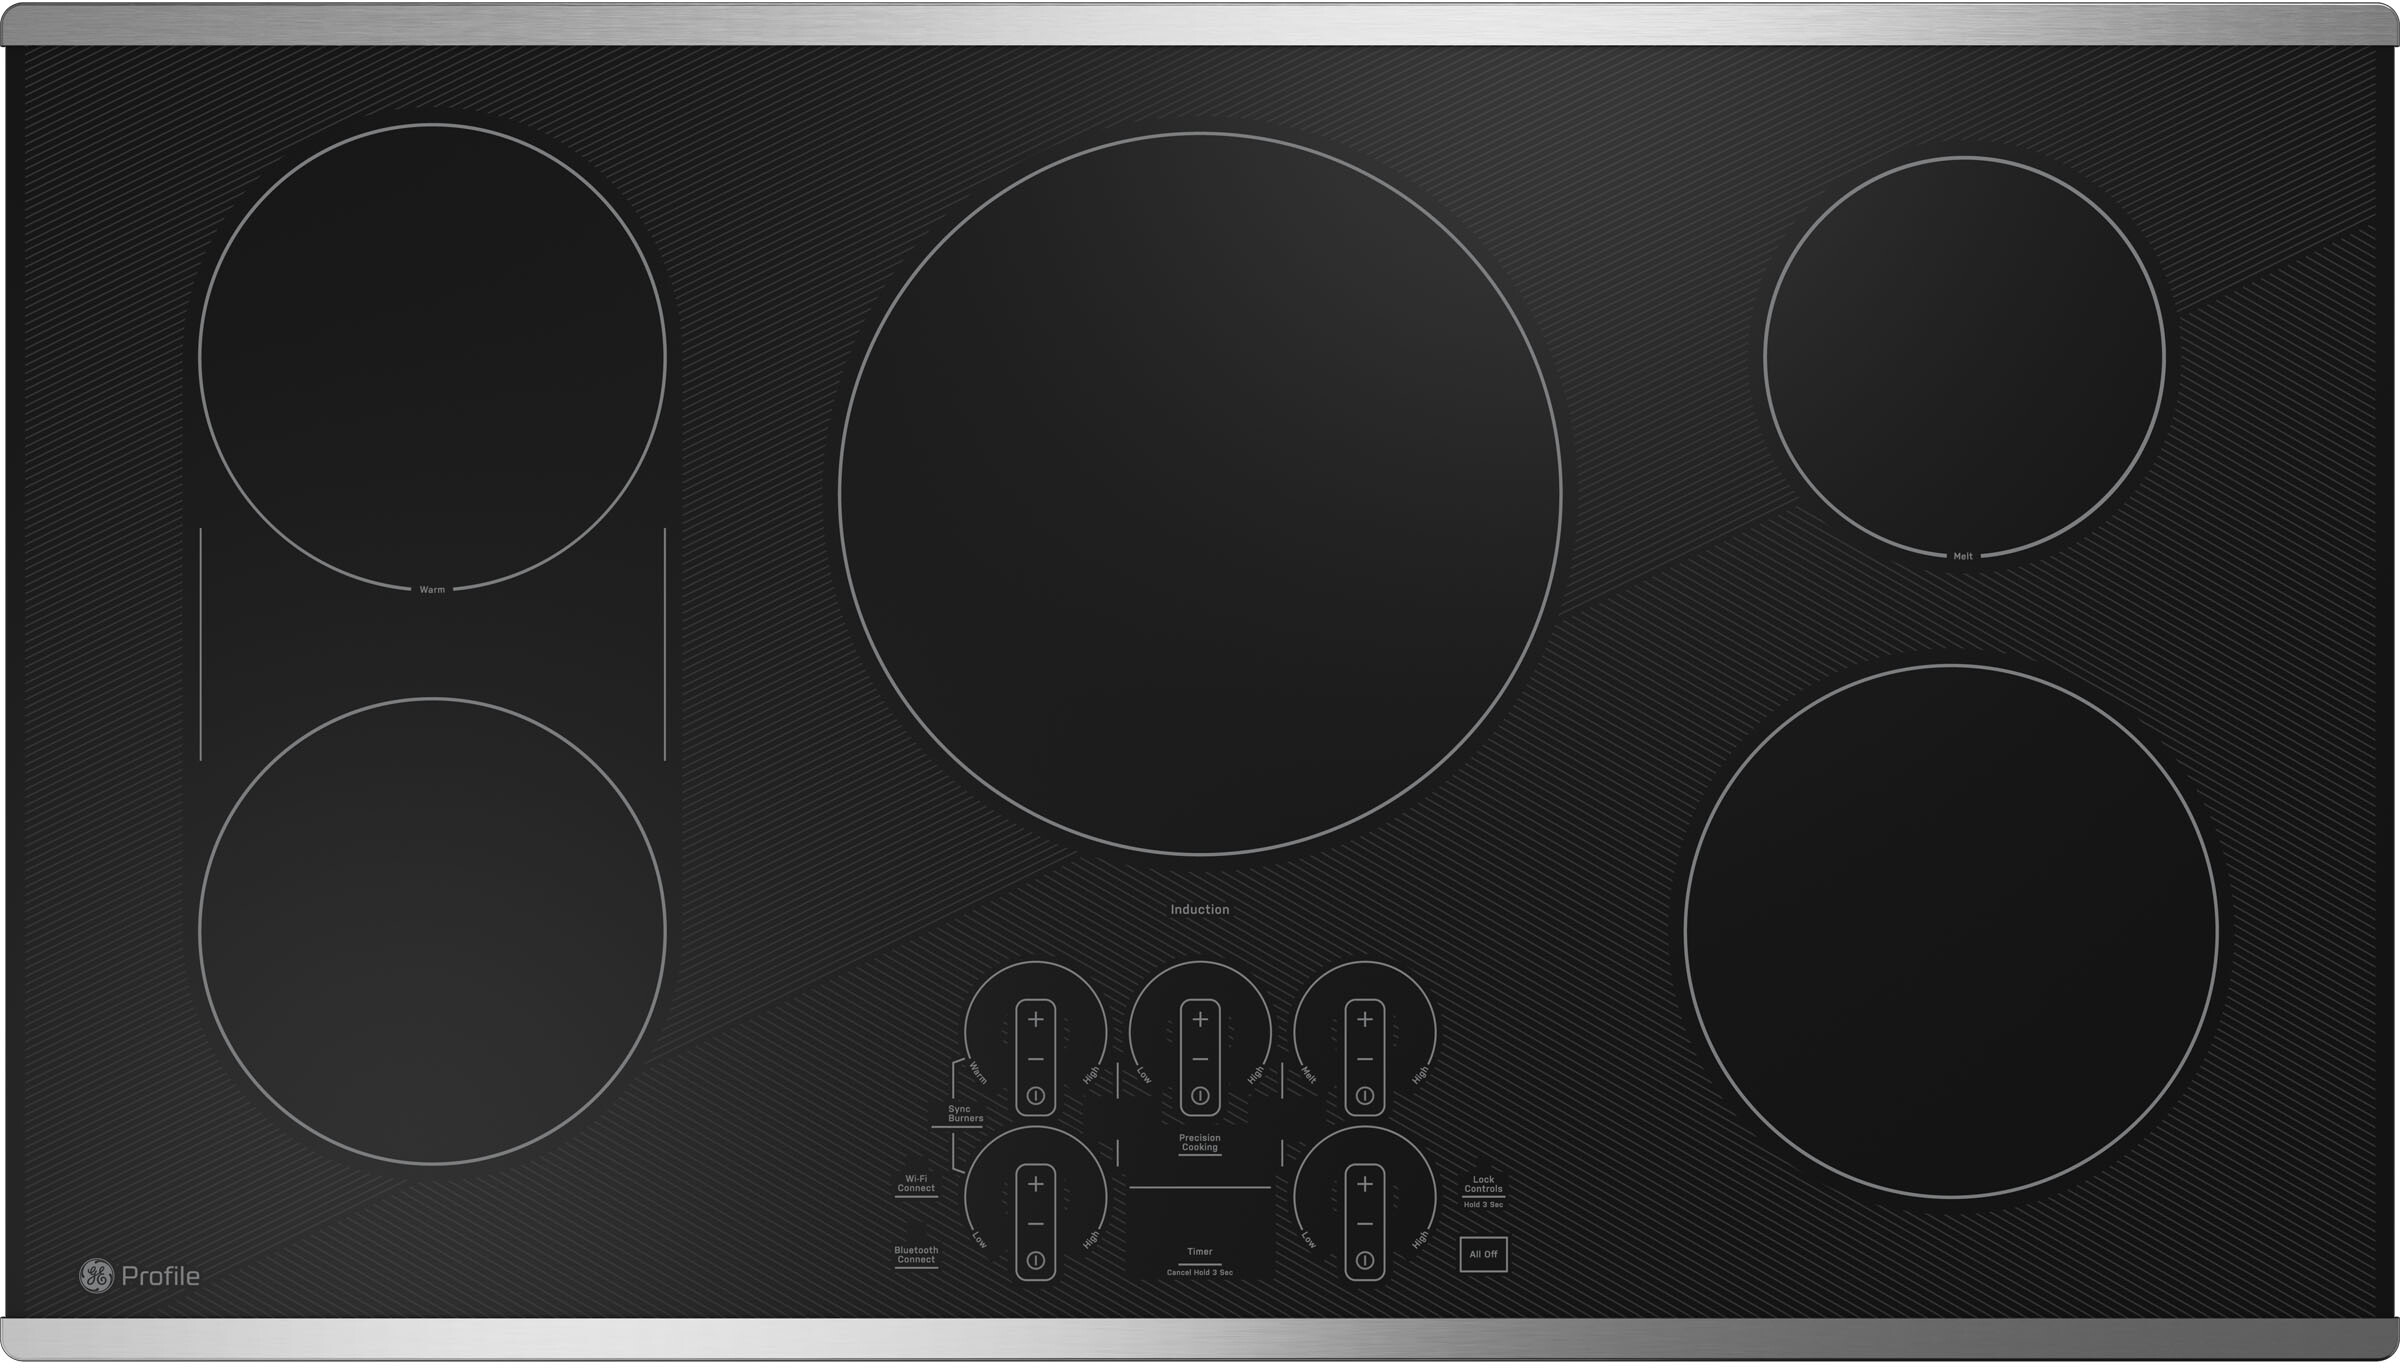 Profile 36"" Induction Drop-In Cooktop - GE PHP9036STSS